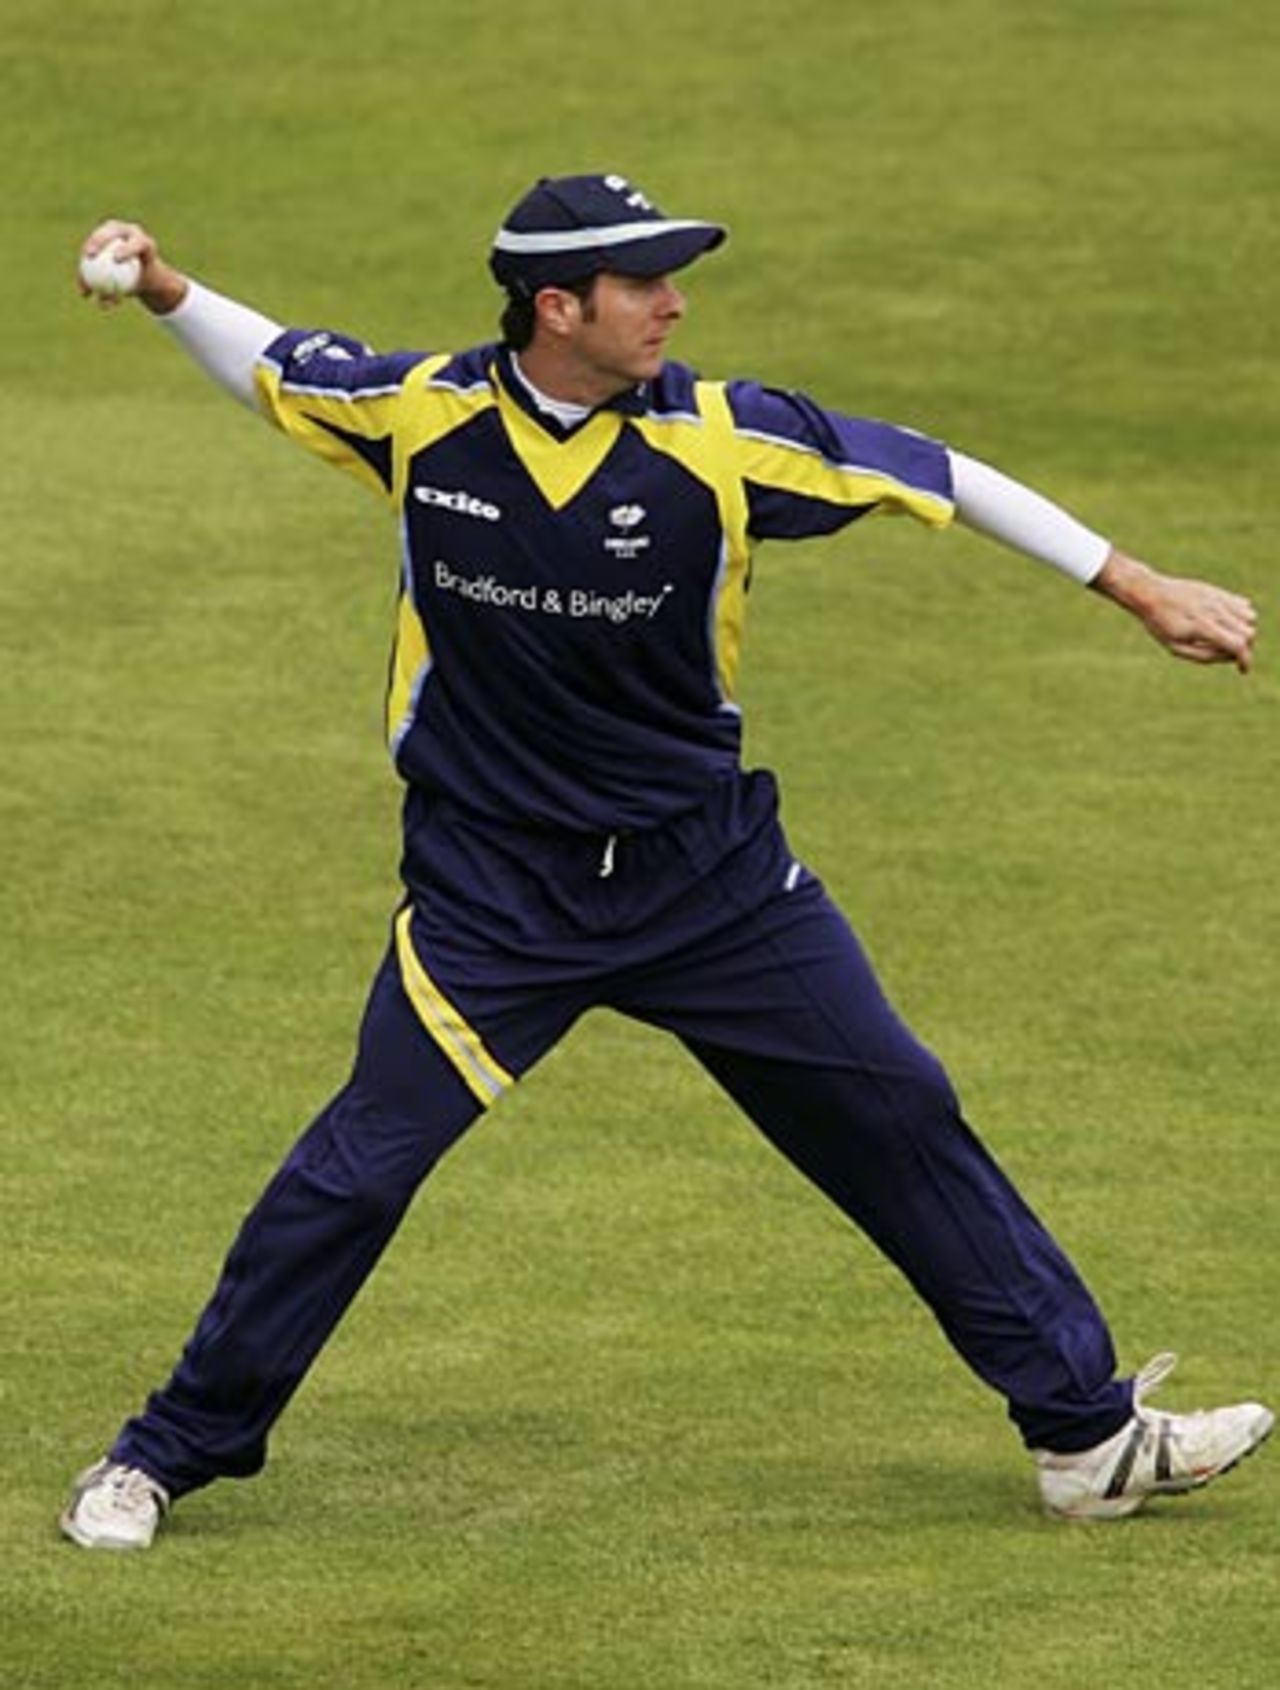 Michael Vaughan in the field on his return to action, Yorkshire v Scotland, C&G Trophy, Headingley, May 29, 2006